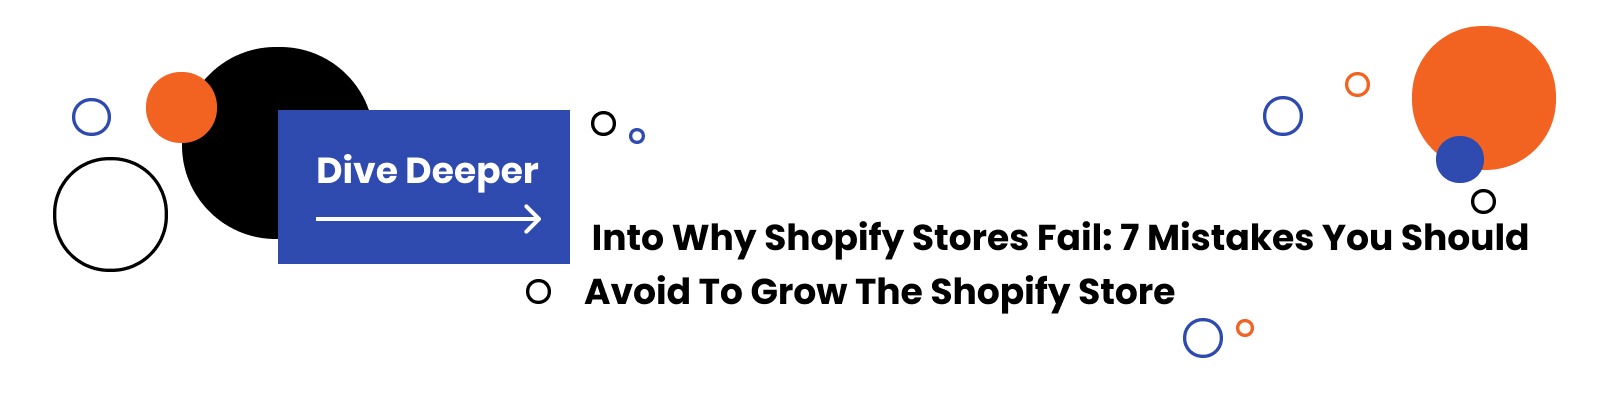 Why Shopify Stores Fail: 7 Mistakes You Should Avoid To Grow The Shopify Store